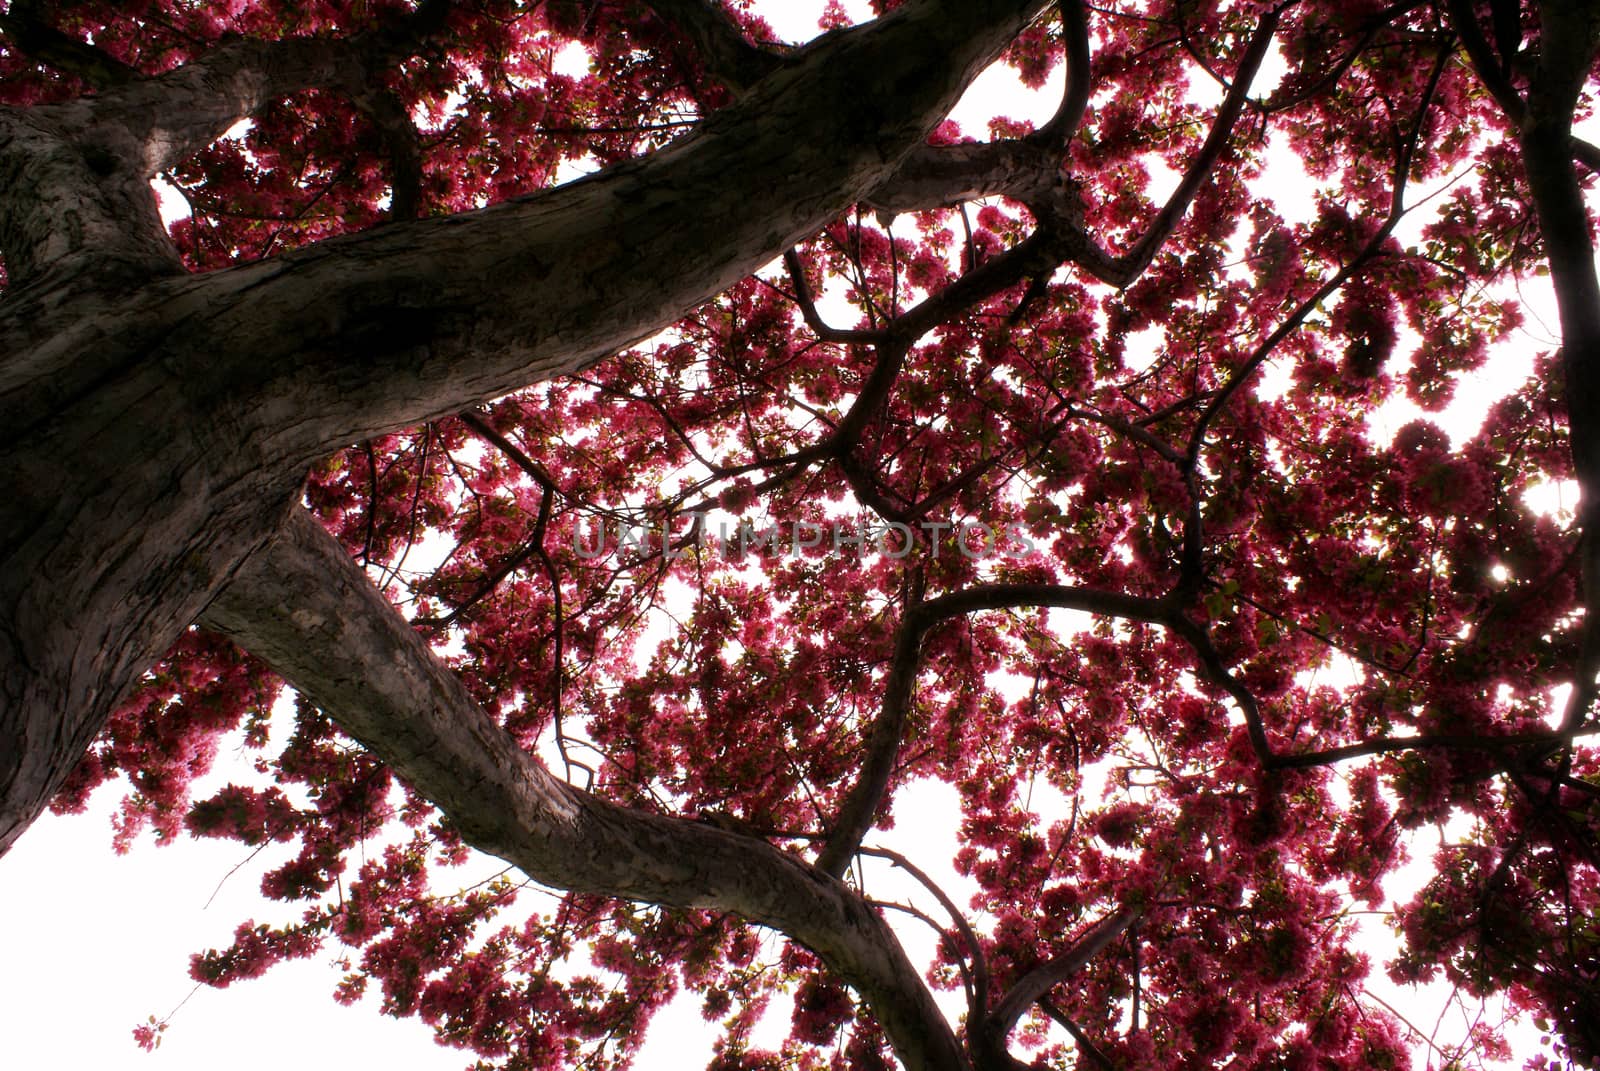 A tranquil view from beneath the Cherry Tree during the full springtime bloom of the pink flowers.